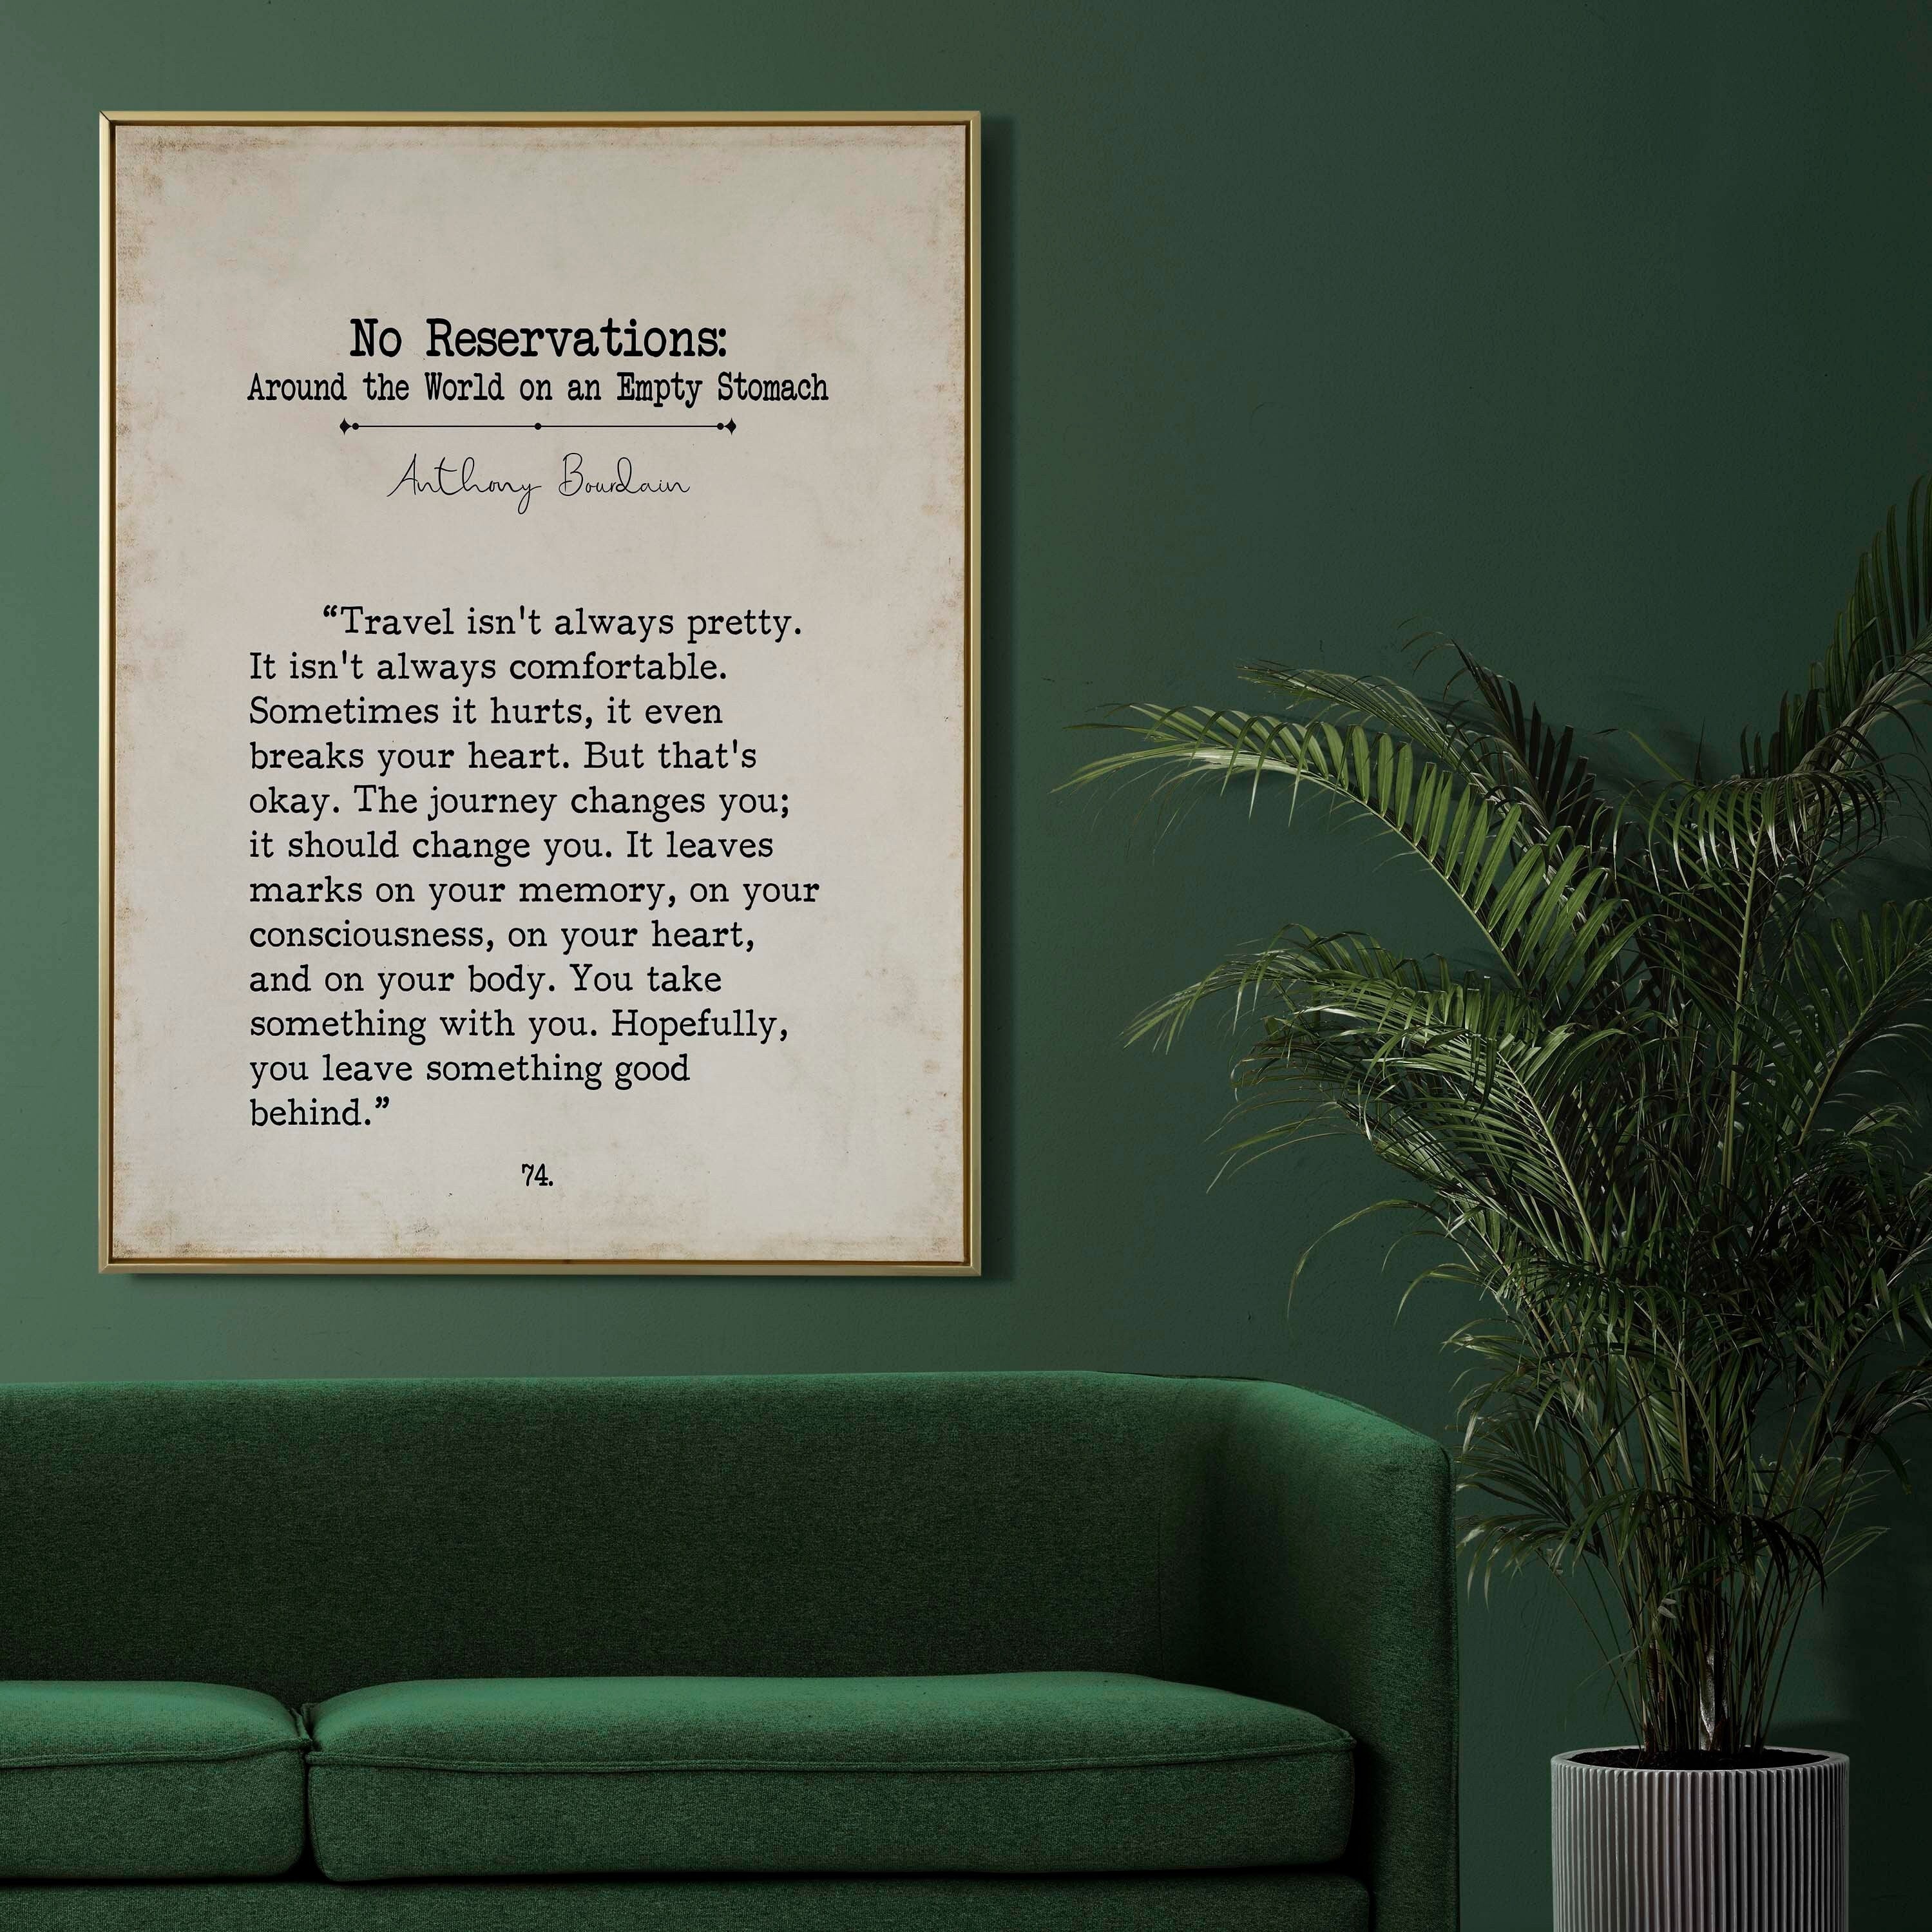 Anthony Bourdain Book Page Inspirational Wall Art, Travel Isn't Pretty Quote Vintage Style Print Wall Decor